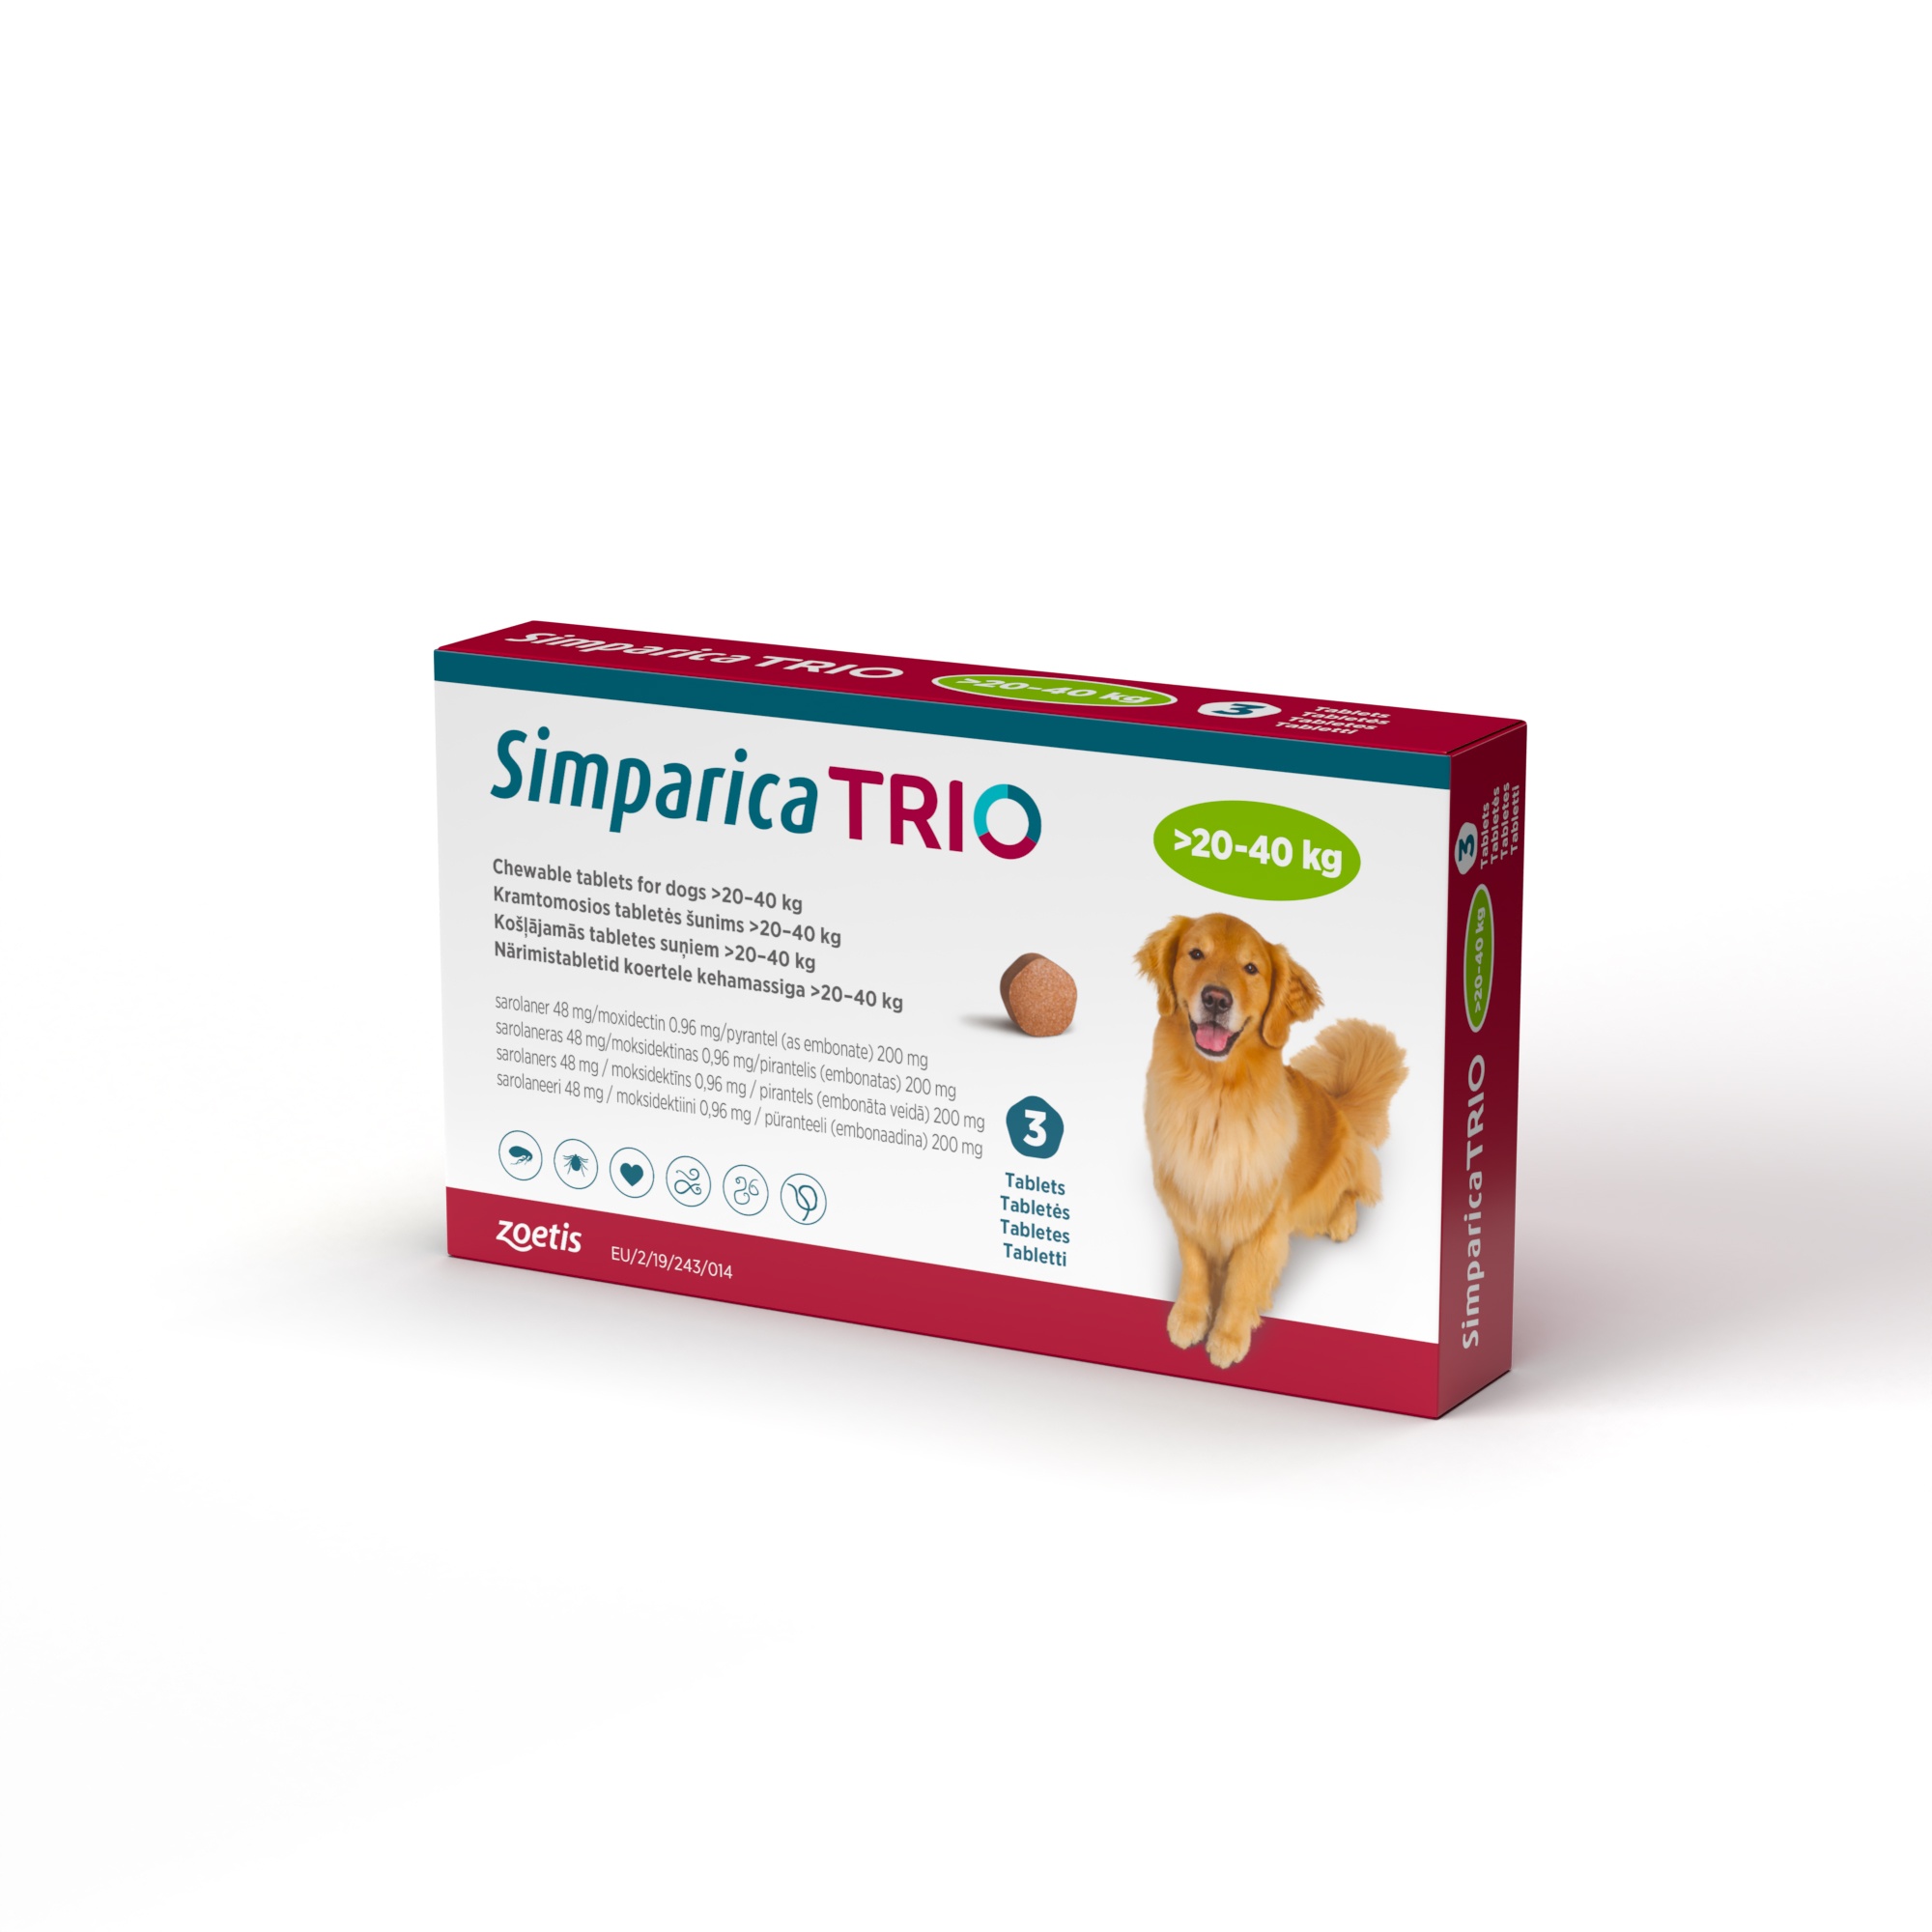 Simparica Trio chewable tablets for 🐶 dogs